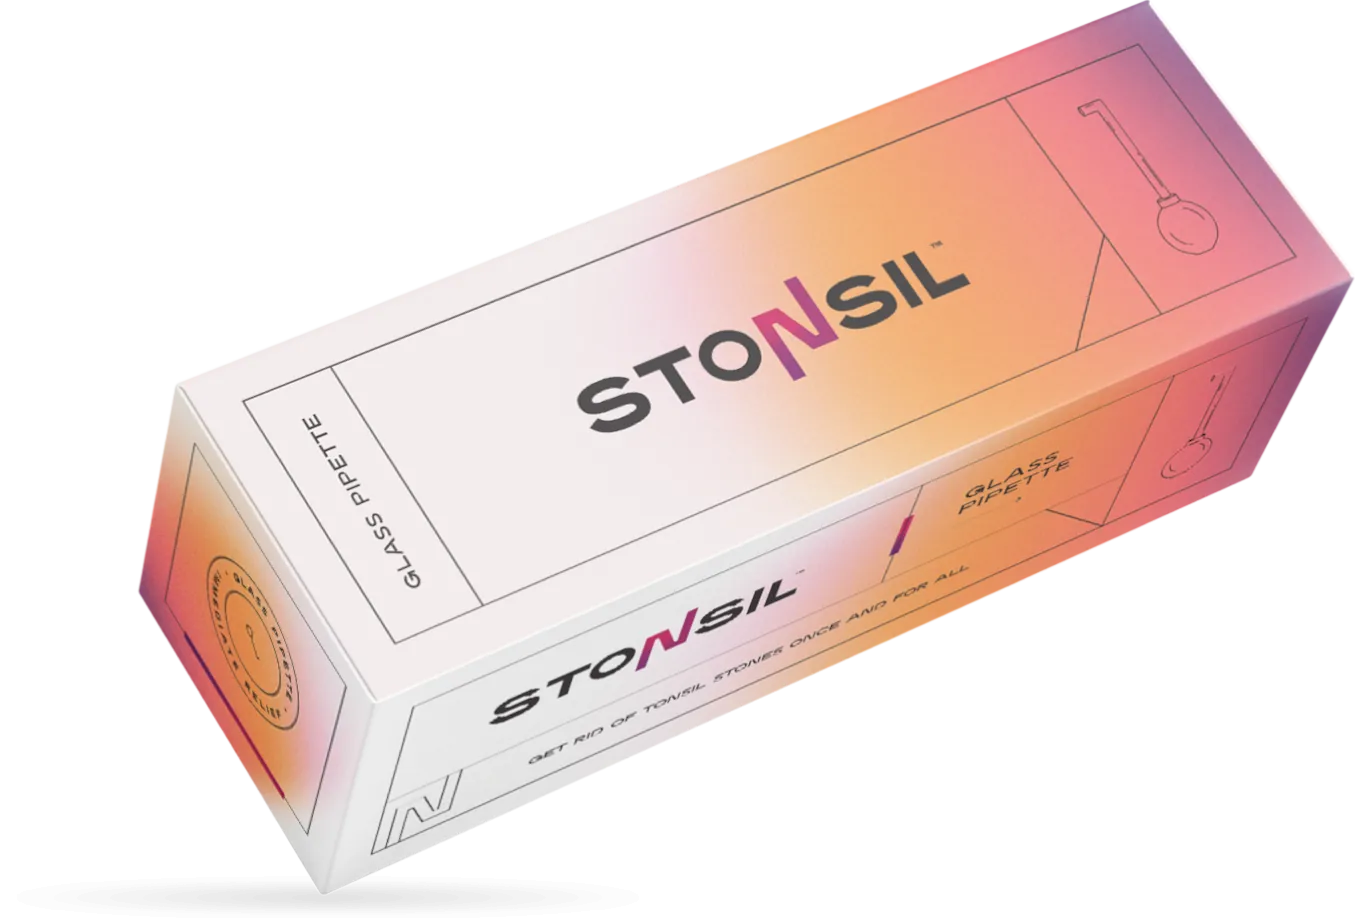 Stonsil™ pipette for removing tonsil stones